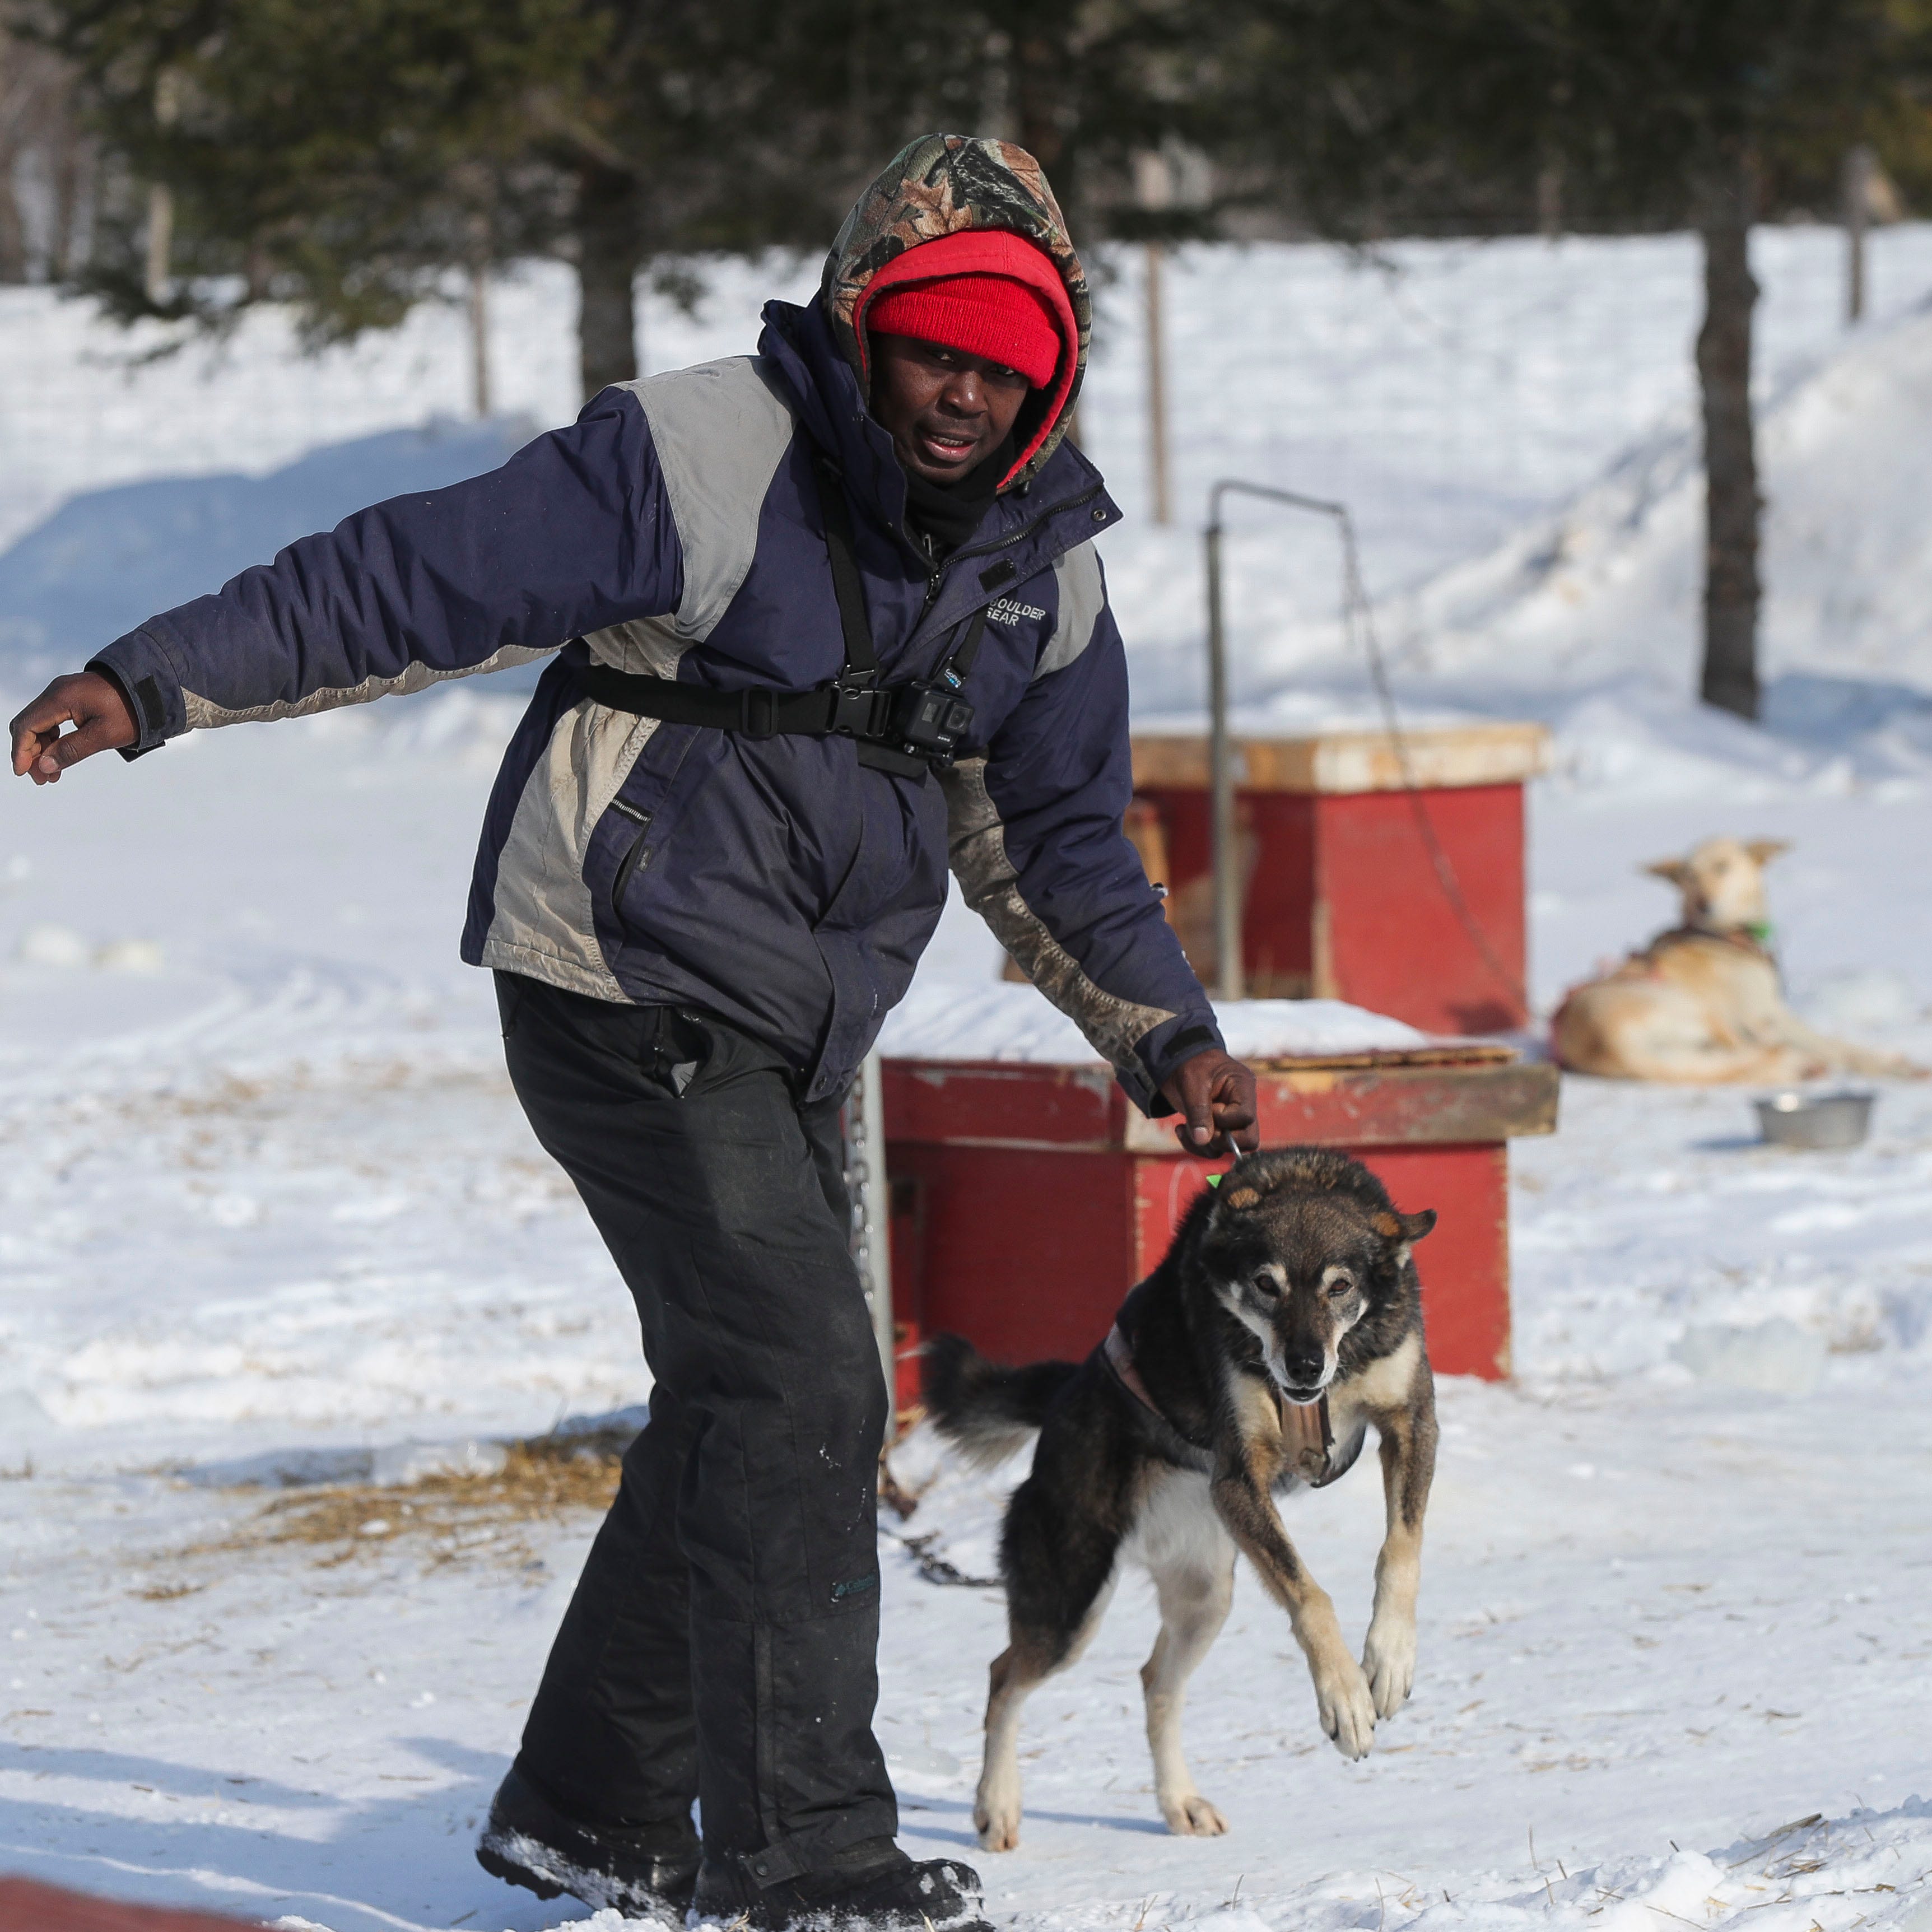 Newton Marshall grabs a sled dog for a training run in January at his home near Lily. Marshall, who is a native of Jamaica, started racing dog sleds in 2005 and has been living and training in Wisconsin since 2019.